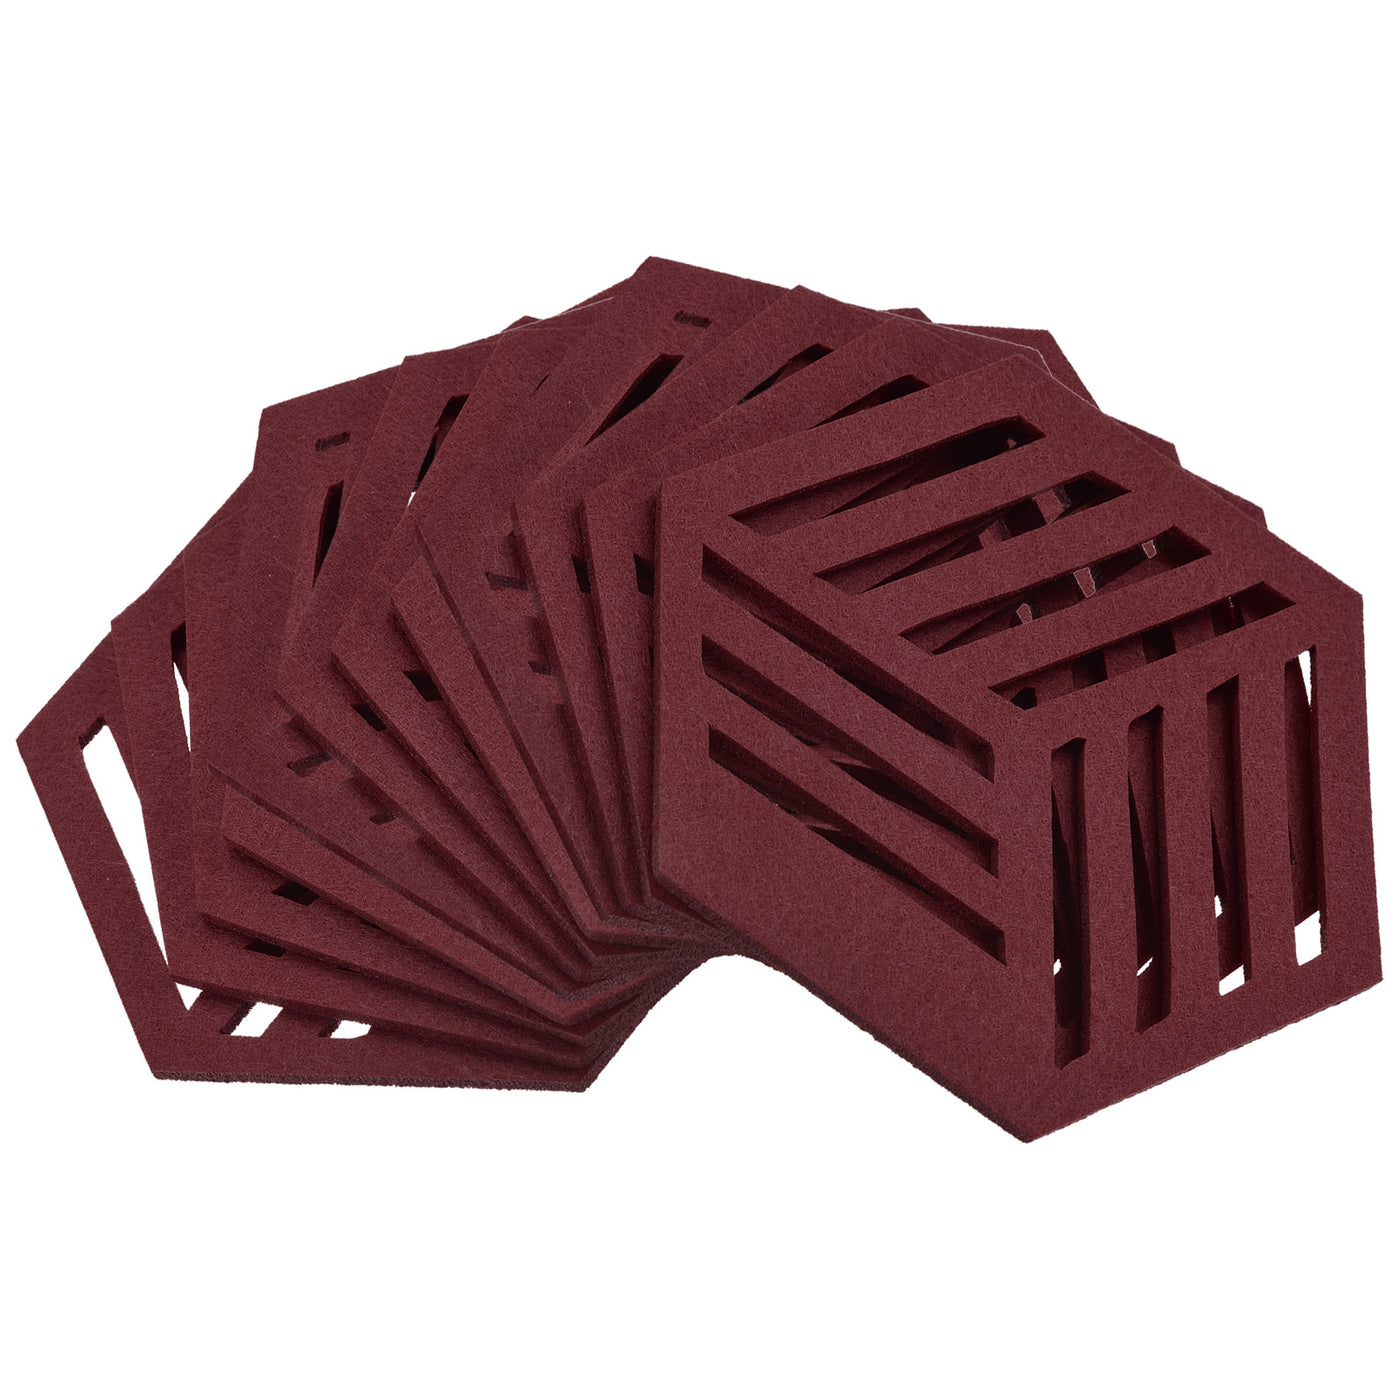 uxcell Uxcell Felt Coasters 12pcs Hexagon Mat Pad Coaster for Drink Cup Pot Vase Wine Red